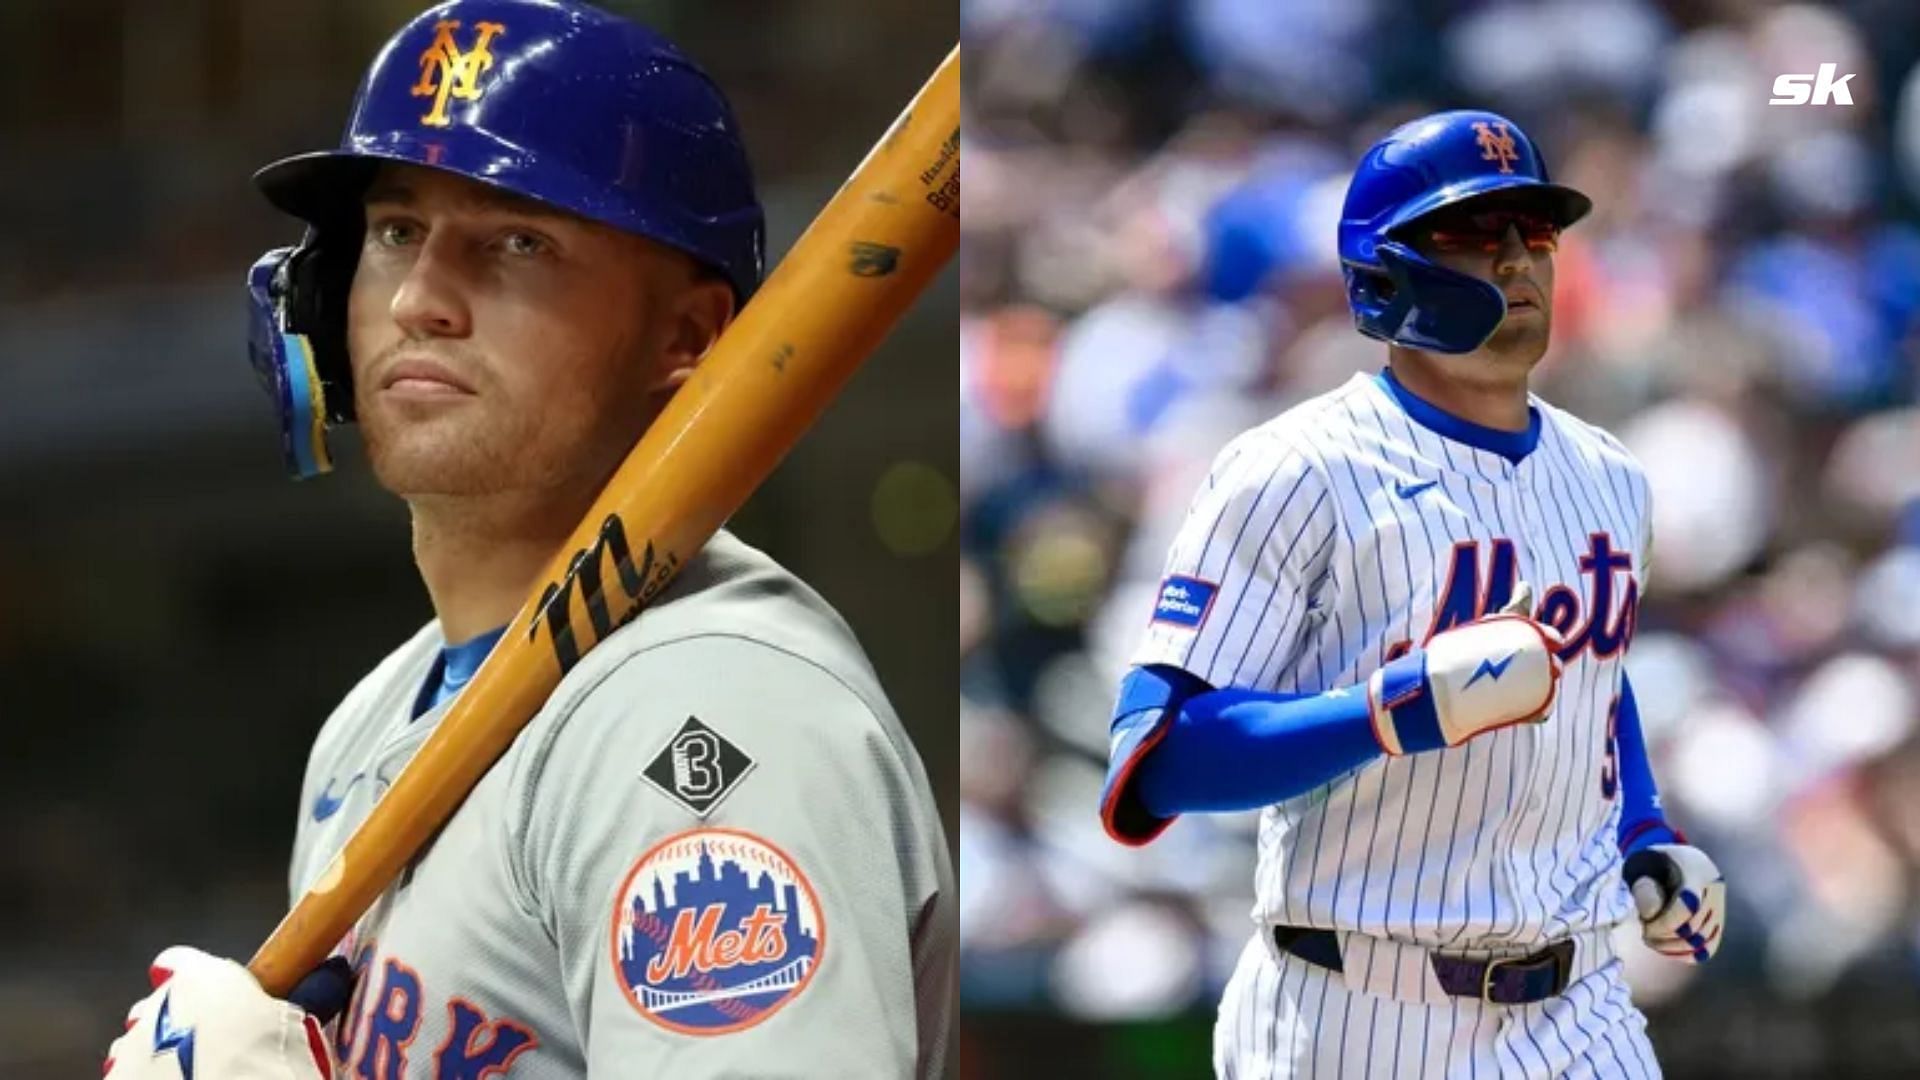 Mets News: Brandon Nimmo exits game early Saturday with injury following checked swing